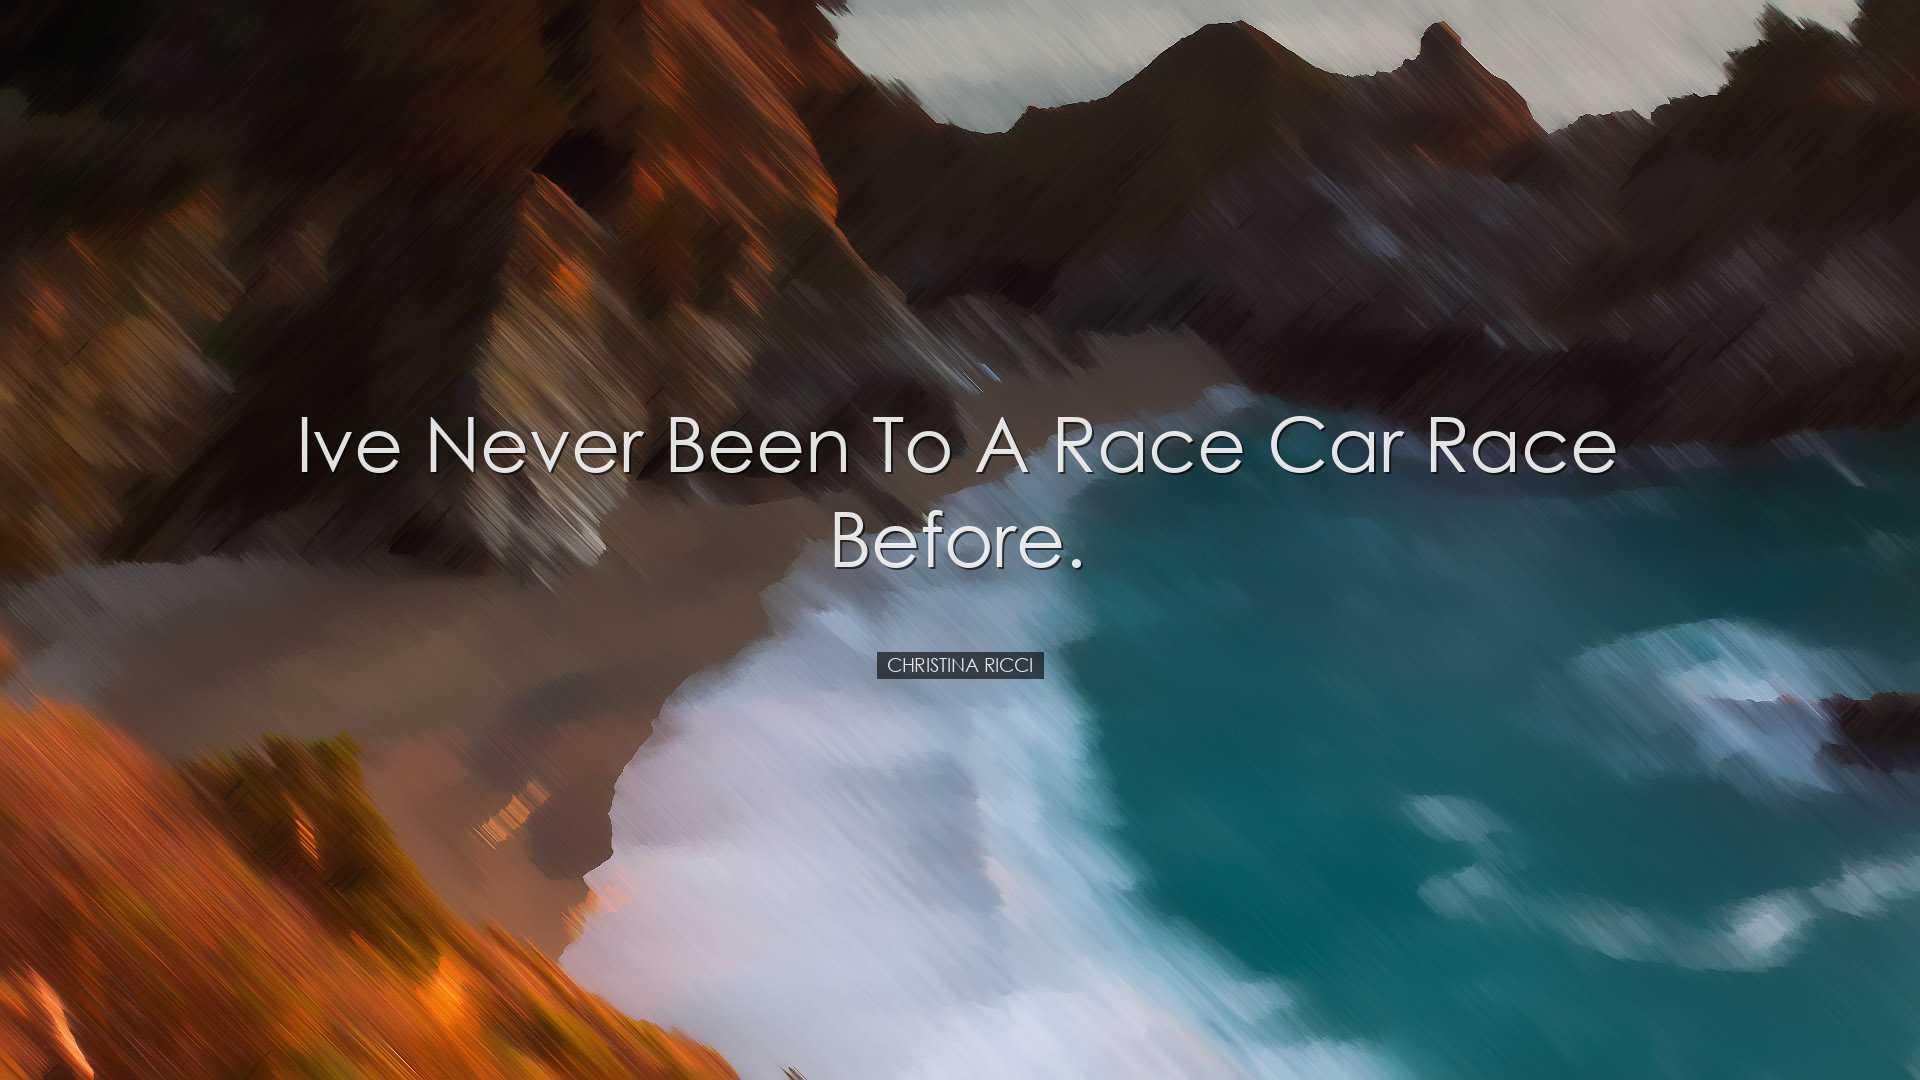 Ive never been to a race car race before. - Christina Ricci